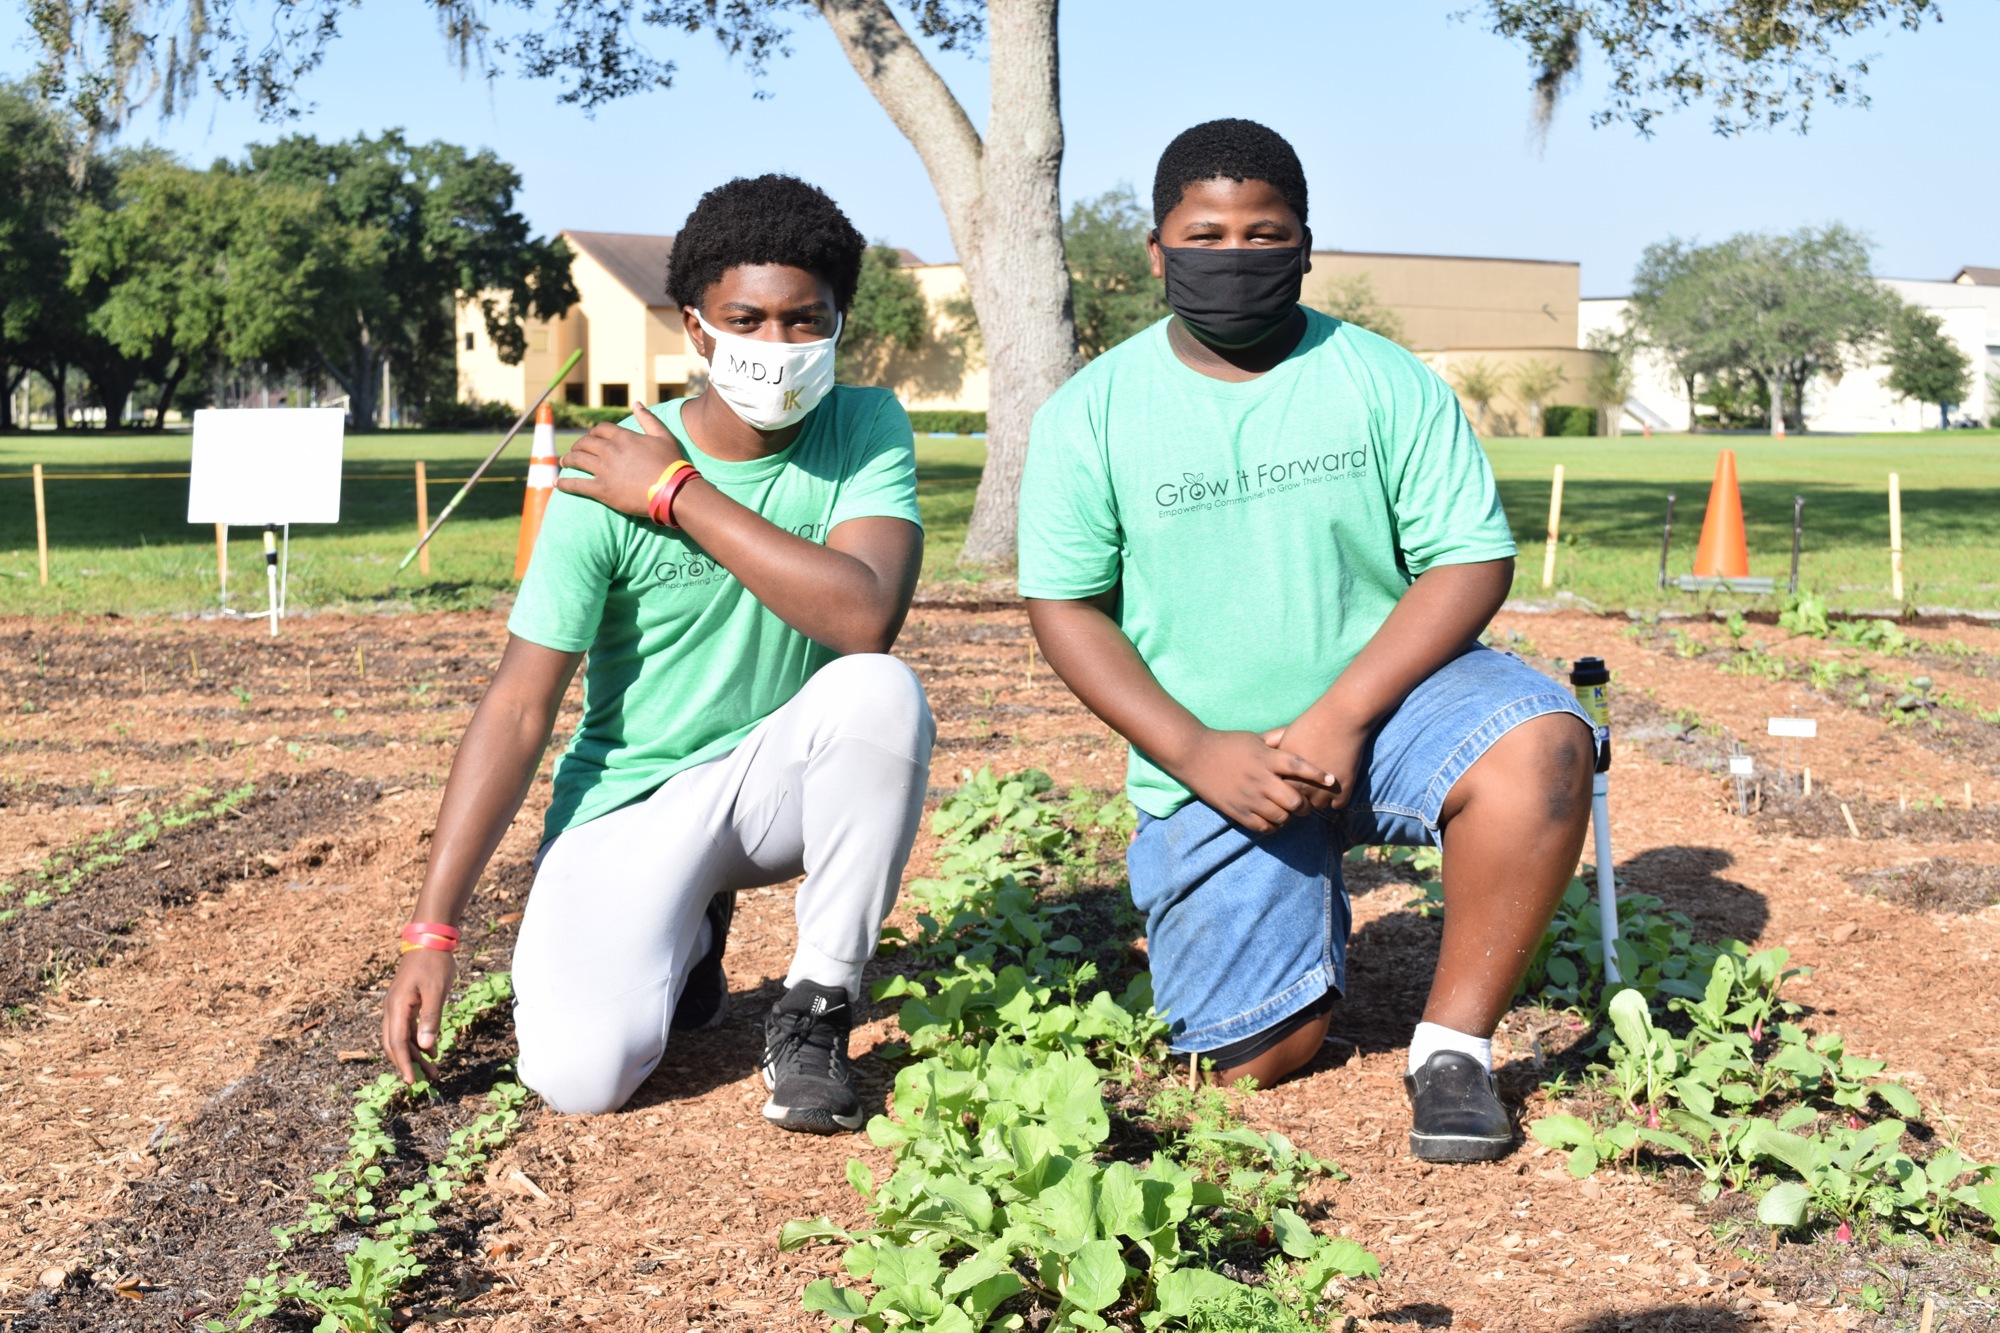 Brothers Montavious and Macarri Jackson, of east Winter Garden, are two of the youth farmers.